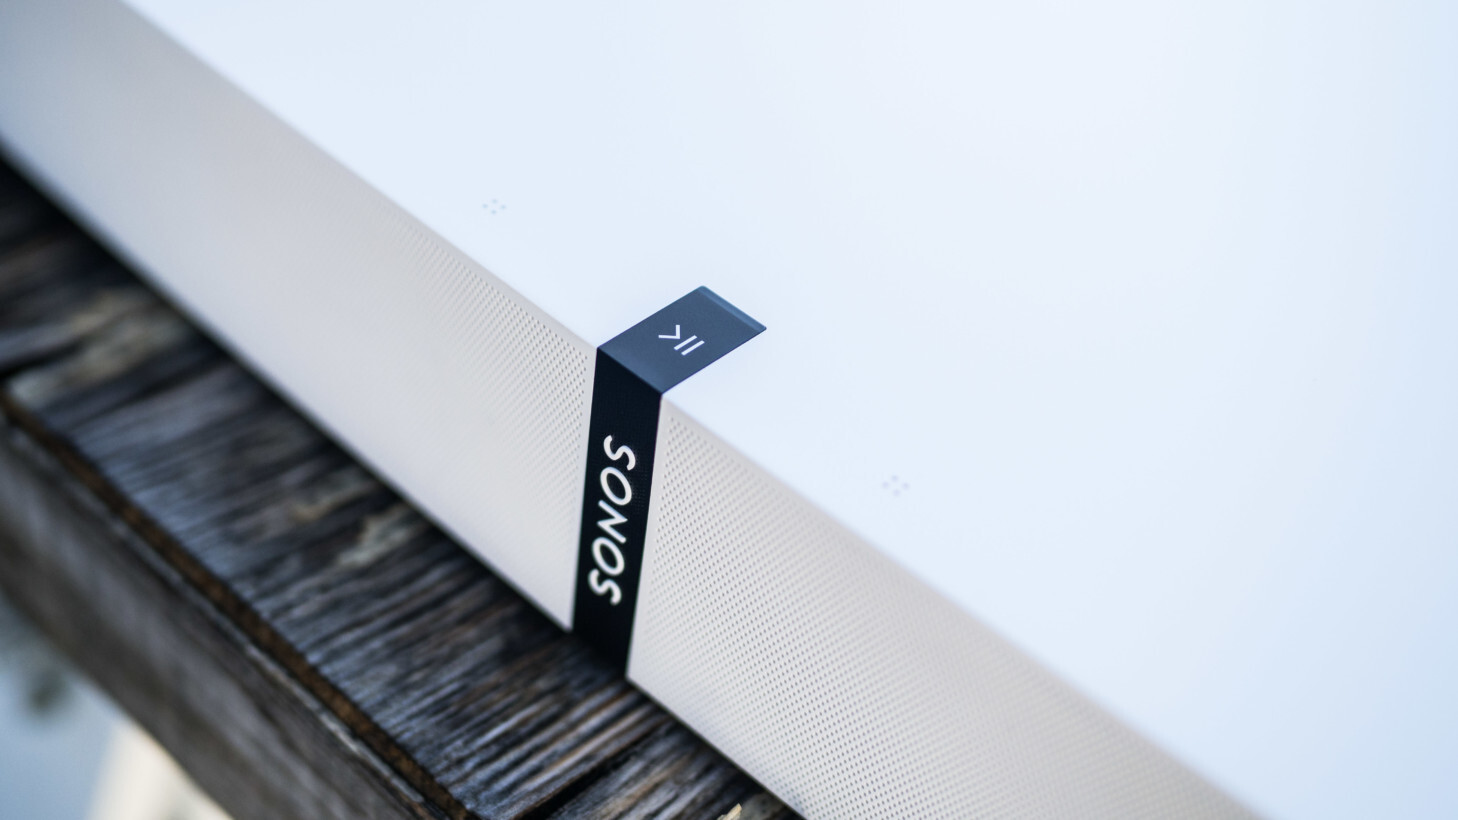 Leak: Here’s our first look at the Sonos Roam, a $169 Bluetooth speaker